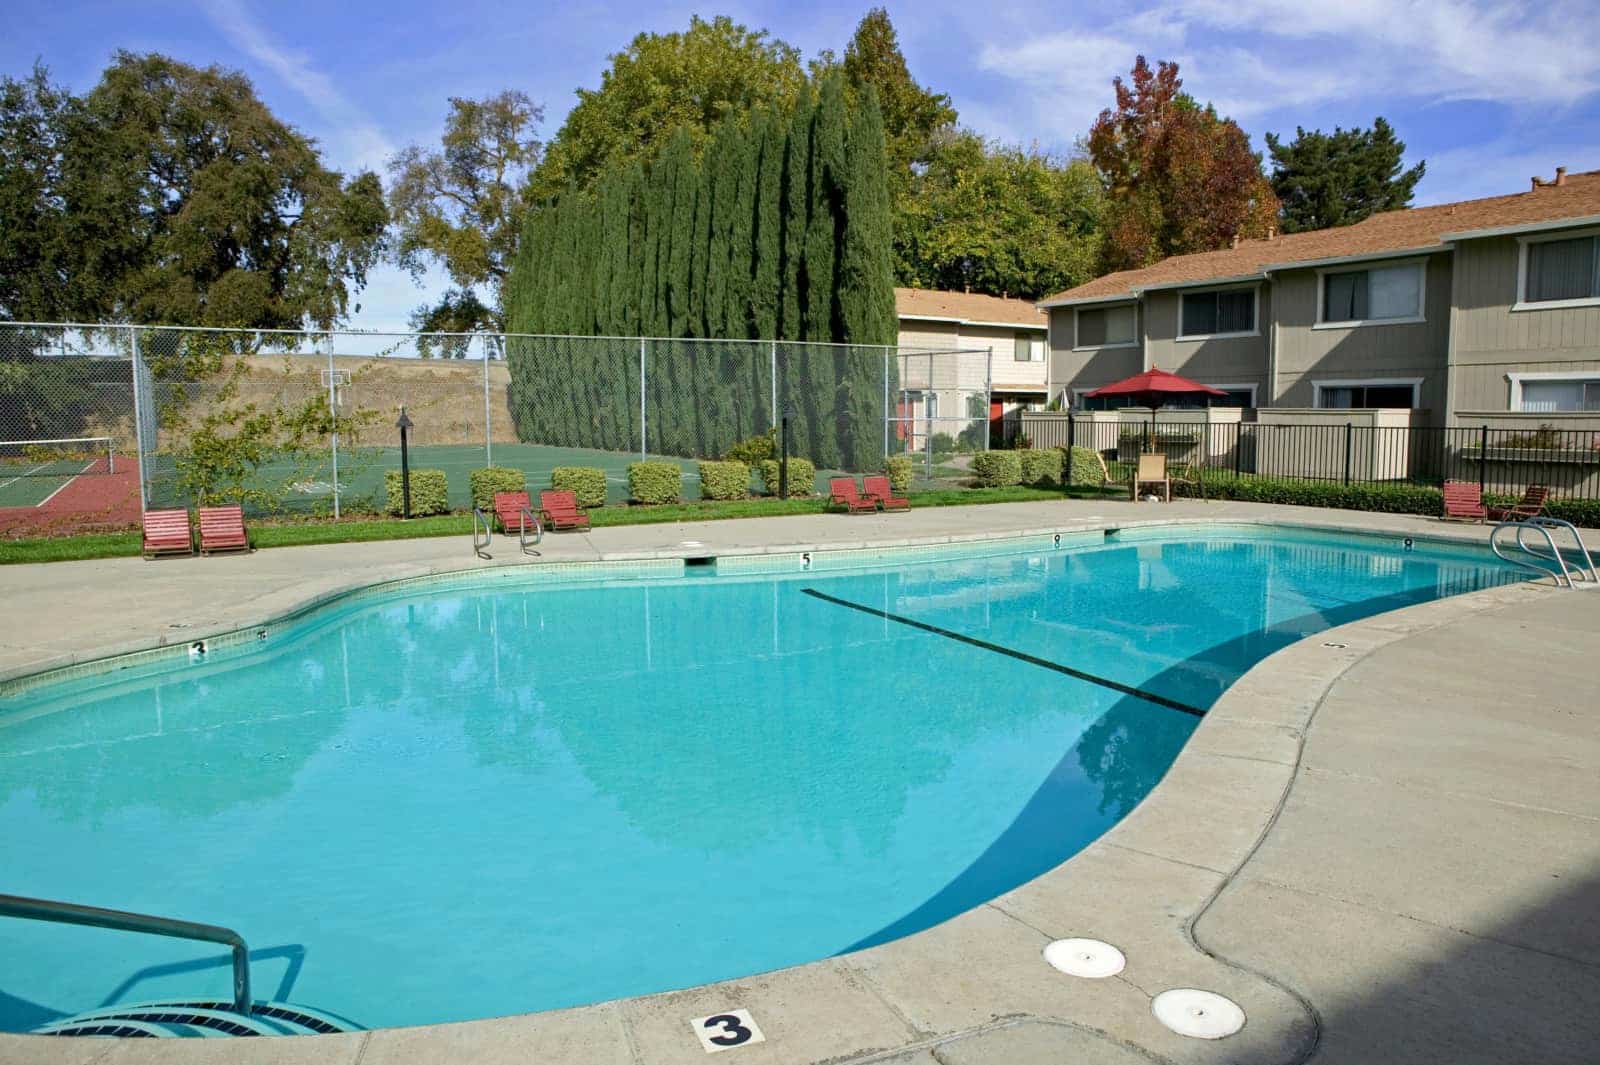 View of the pool with a lawn, tennis court and apartment buildings in the background.